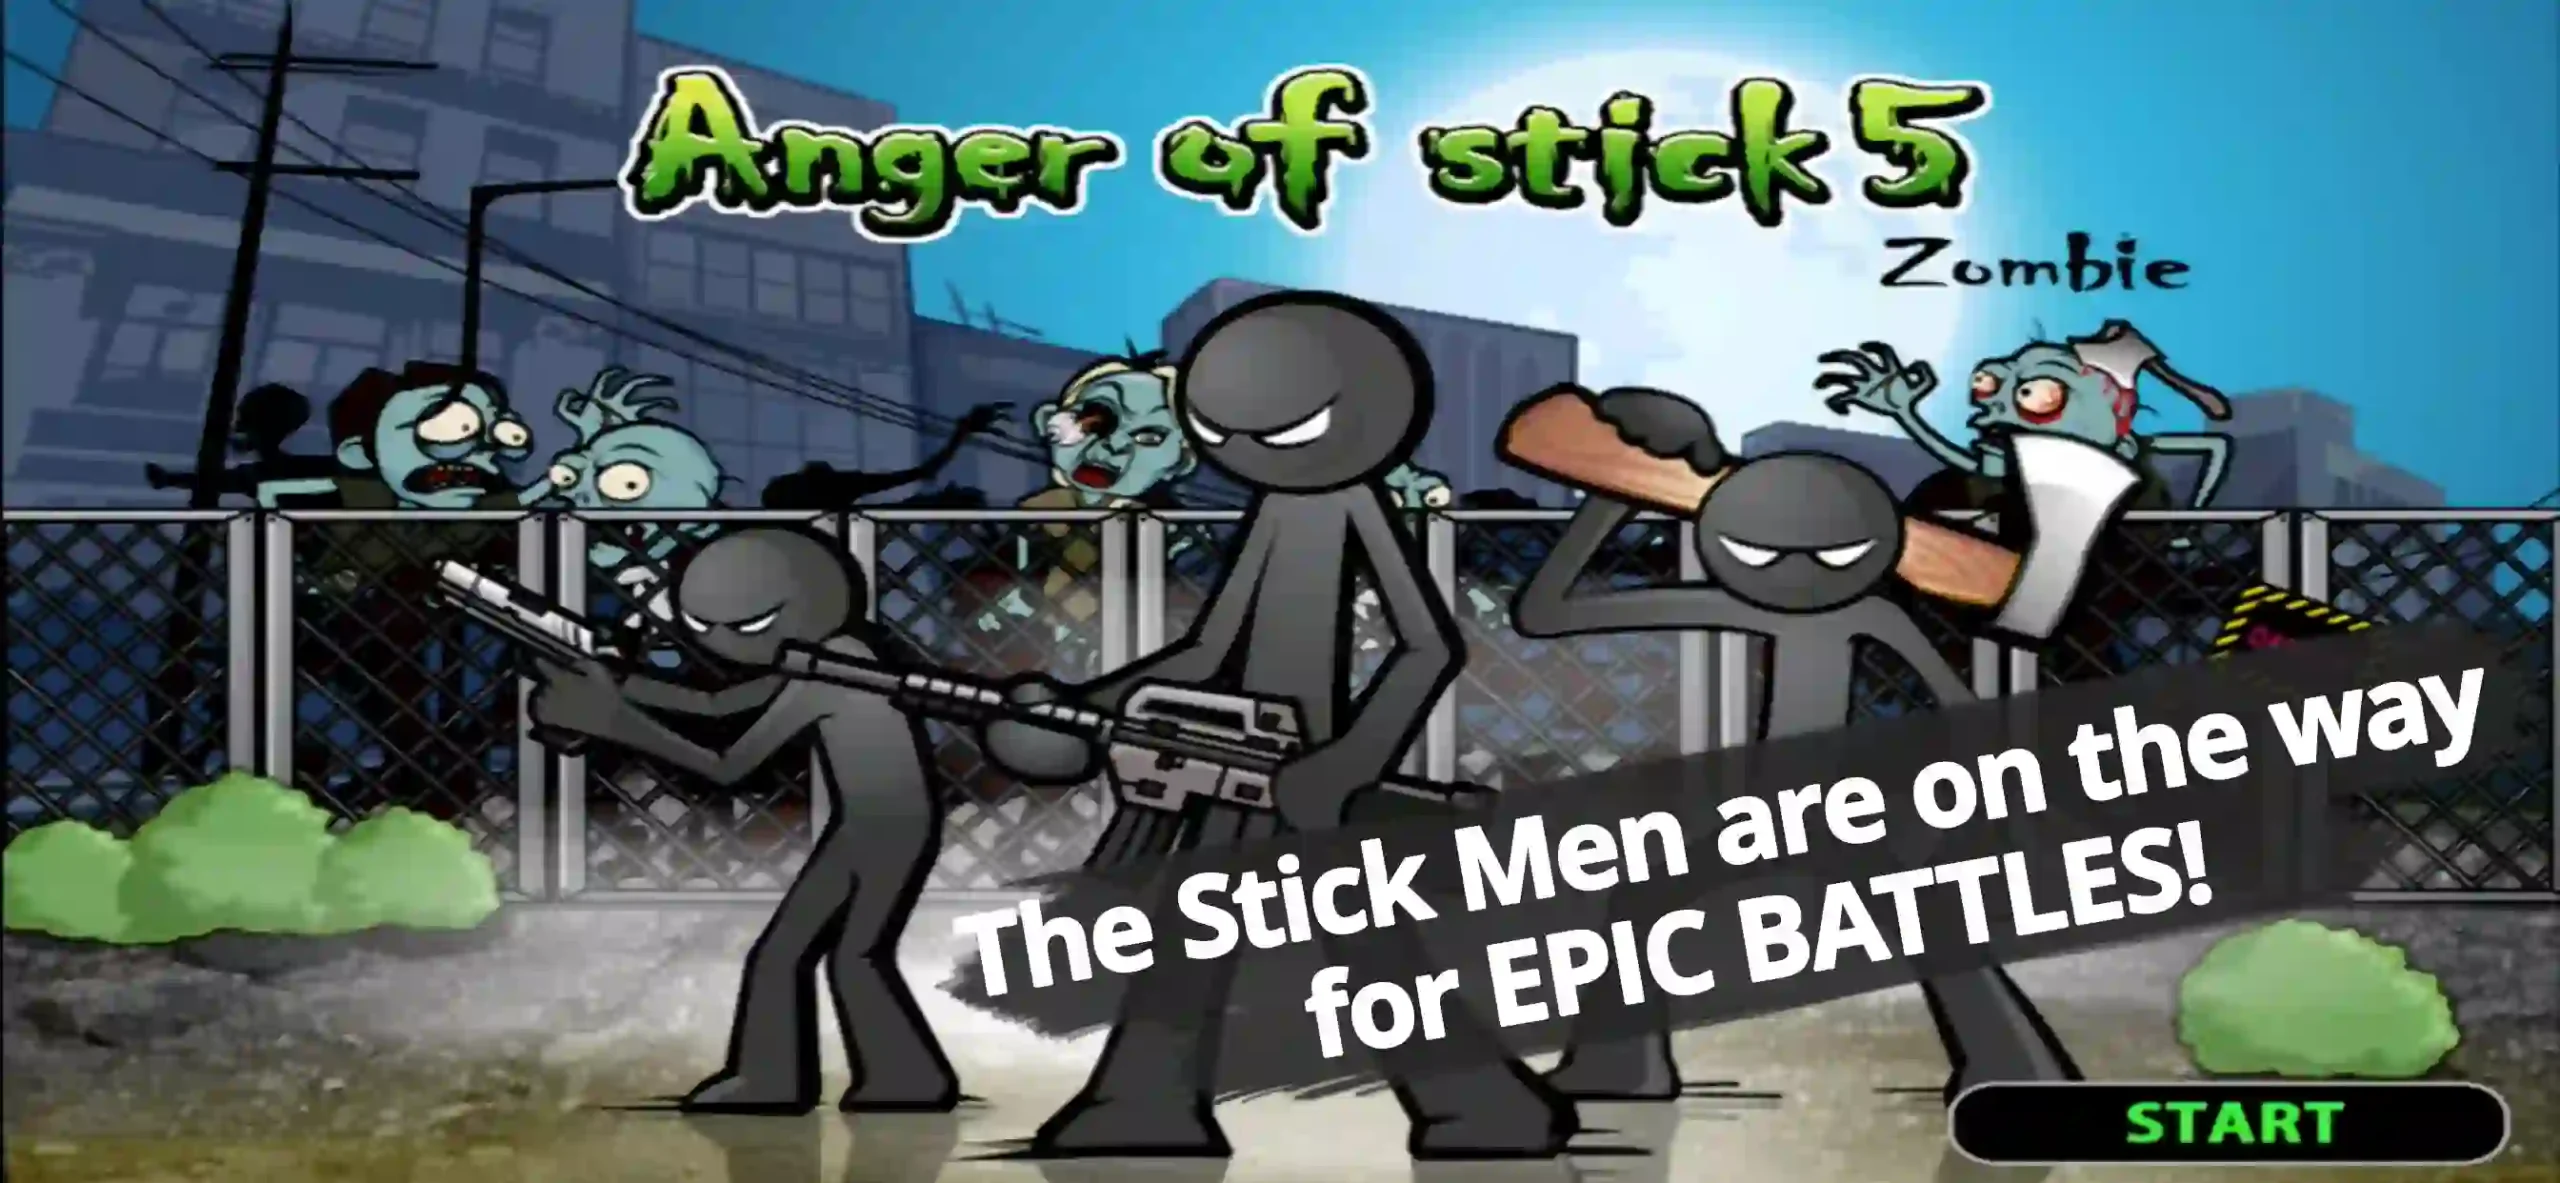 Anger of Stick 5 Zombie